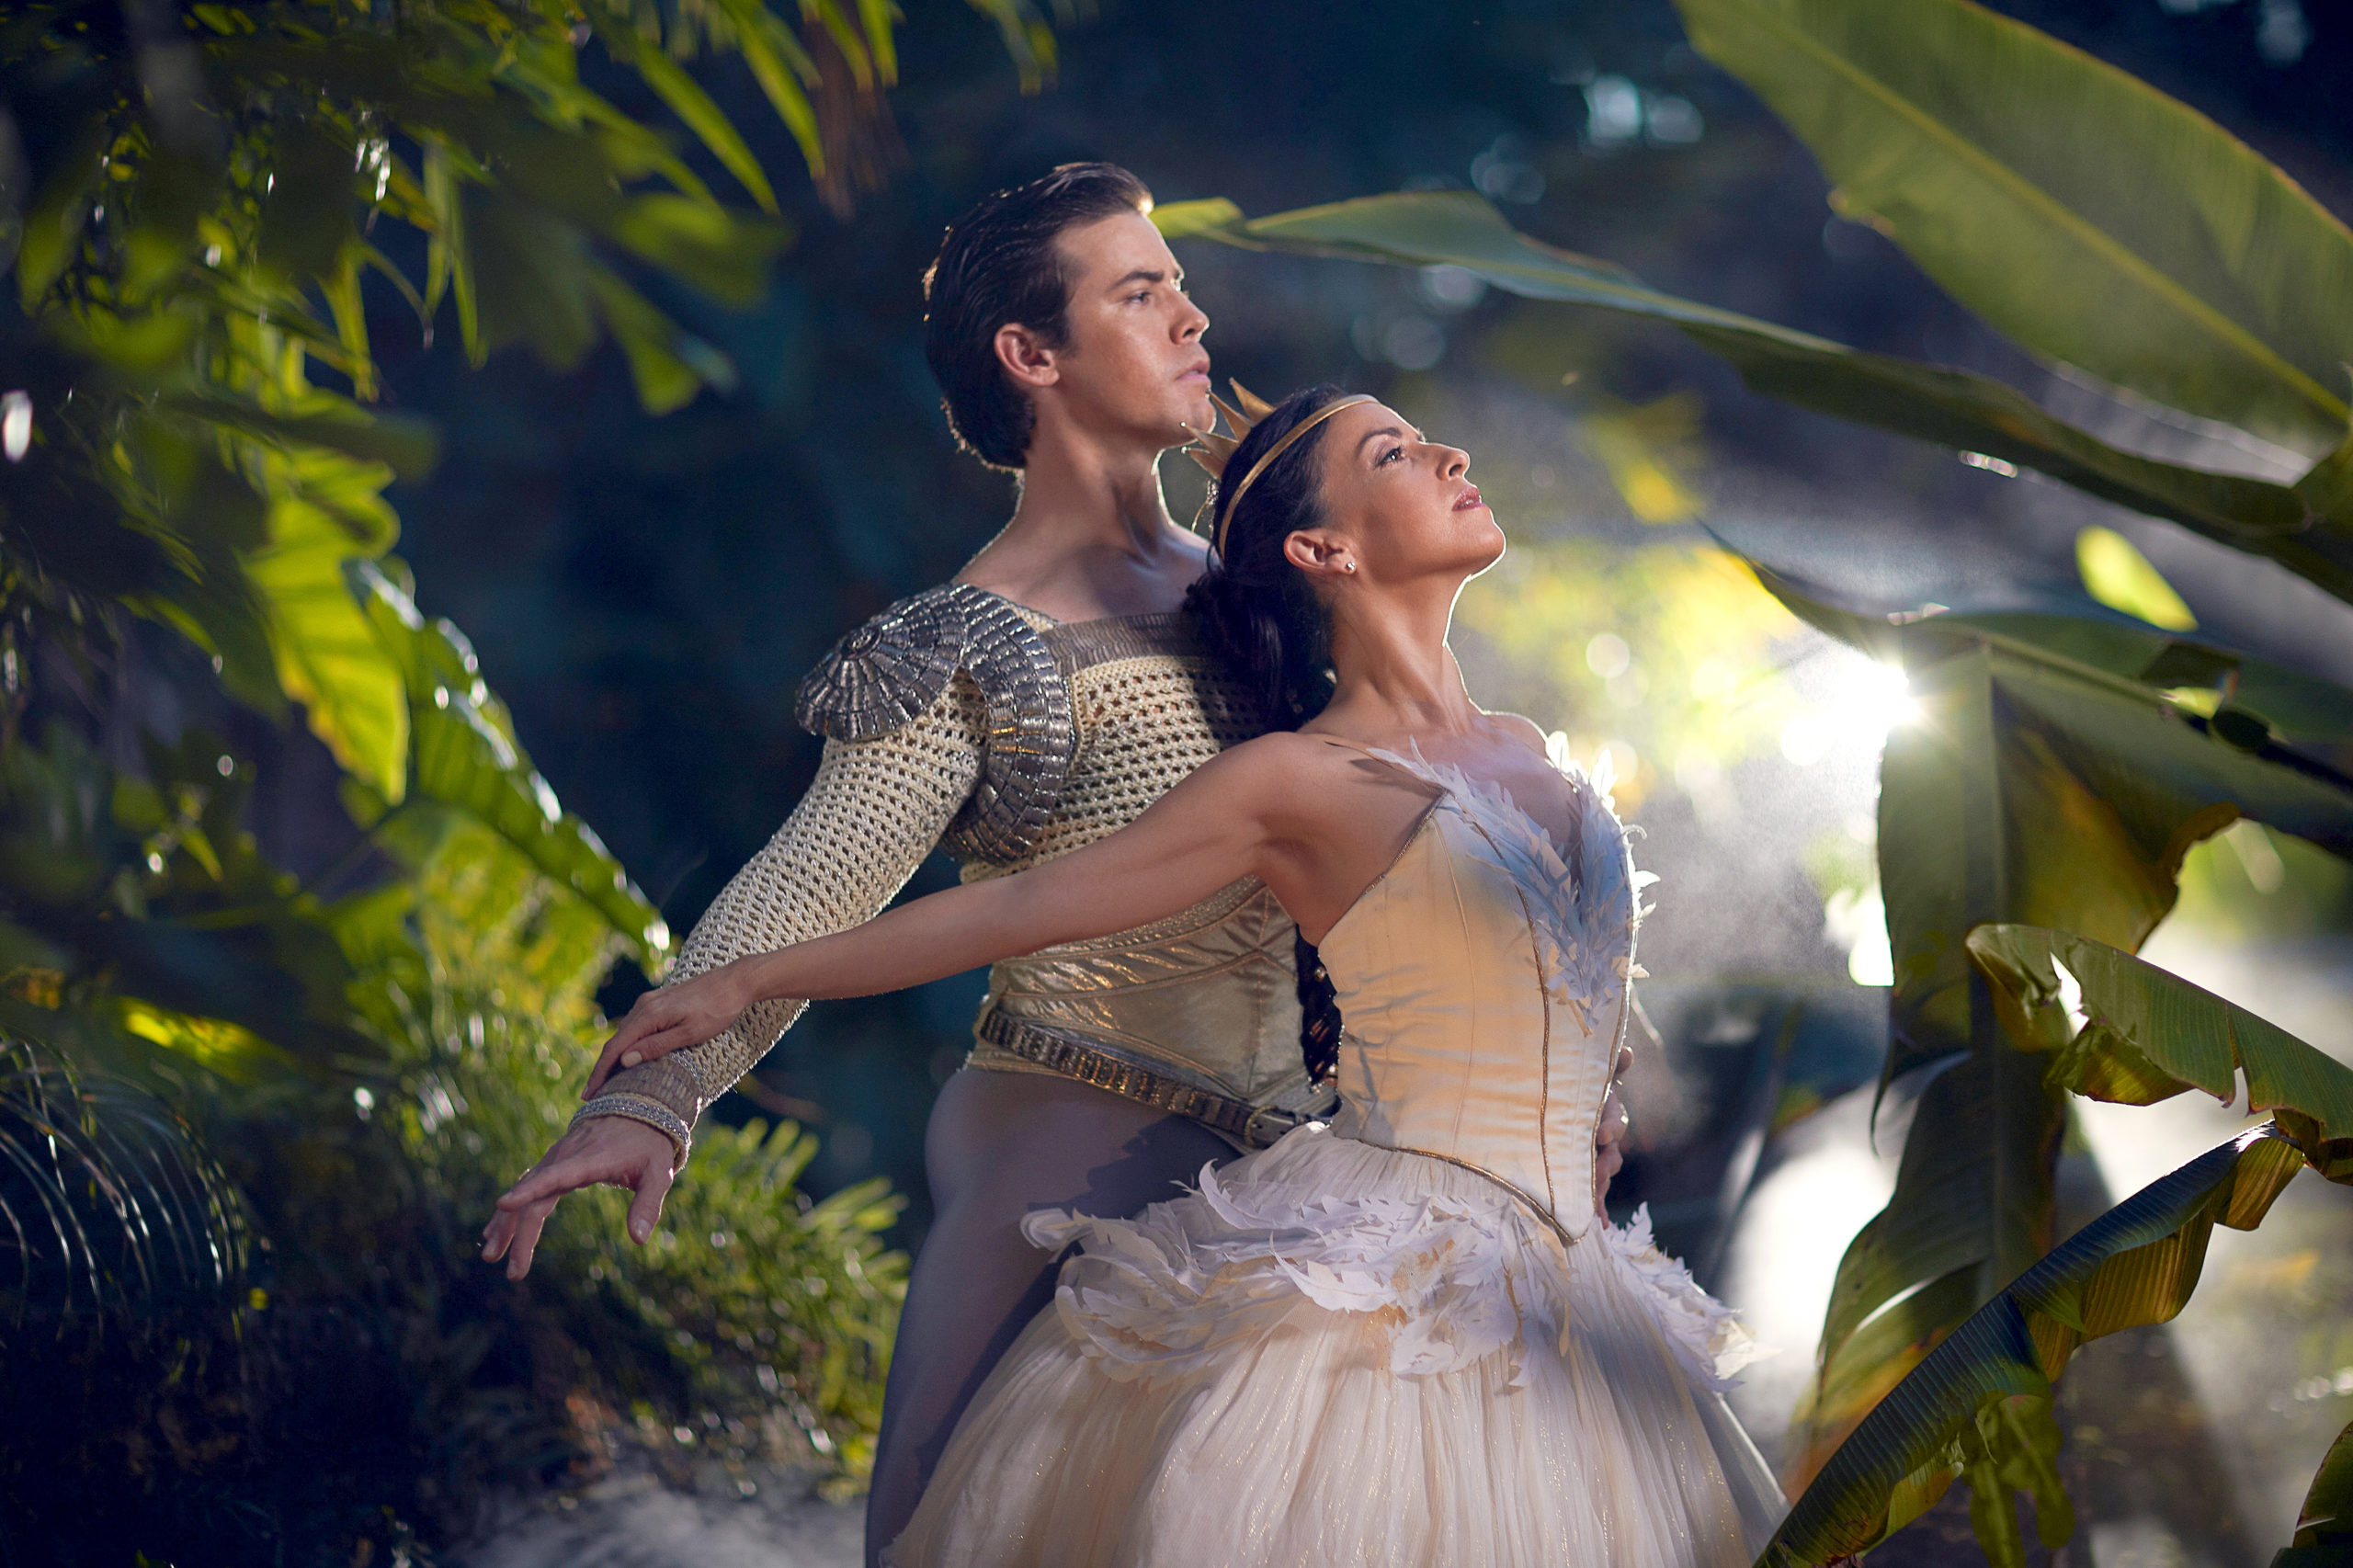 Carlos Quenedit and Katia Carranza pose in a promotional photo for the ballet "Swan Lake." Framed by lush tree branches, the pair stand in profile looking towards the right, and Carranza, wearing a white swan tutu, arches back slightly and streches her arms behind her to touch Quenedit's arms. Quenedit wears a white and silver tunic and gray tights and holds his arms out low.